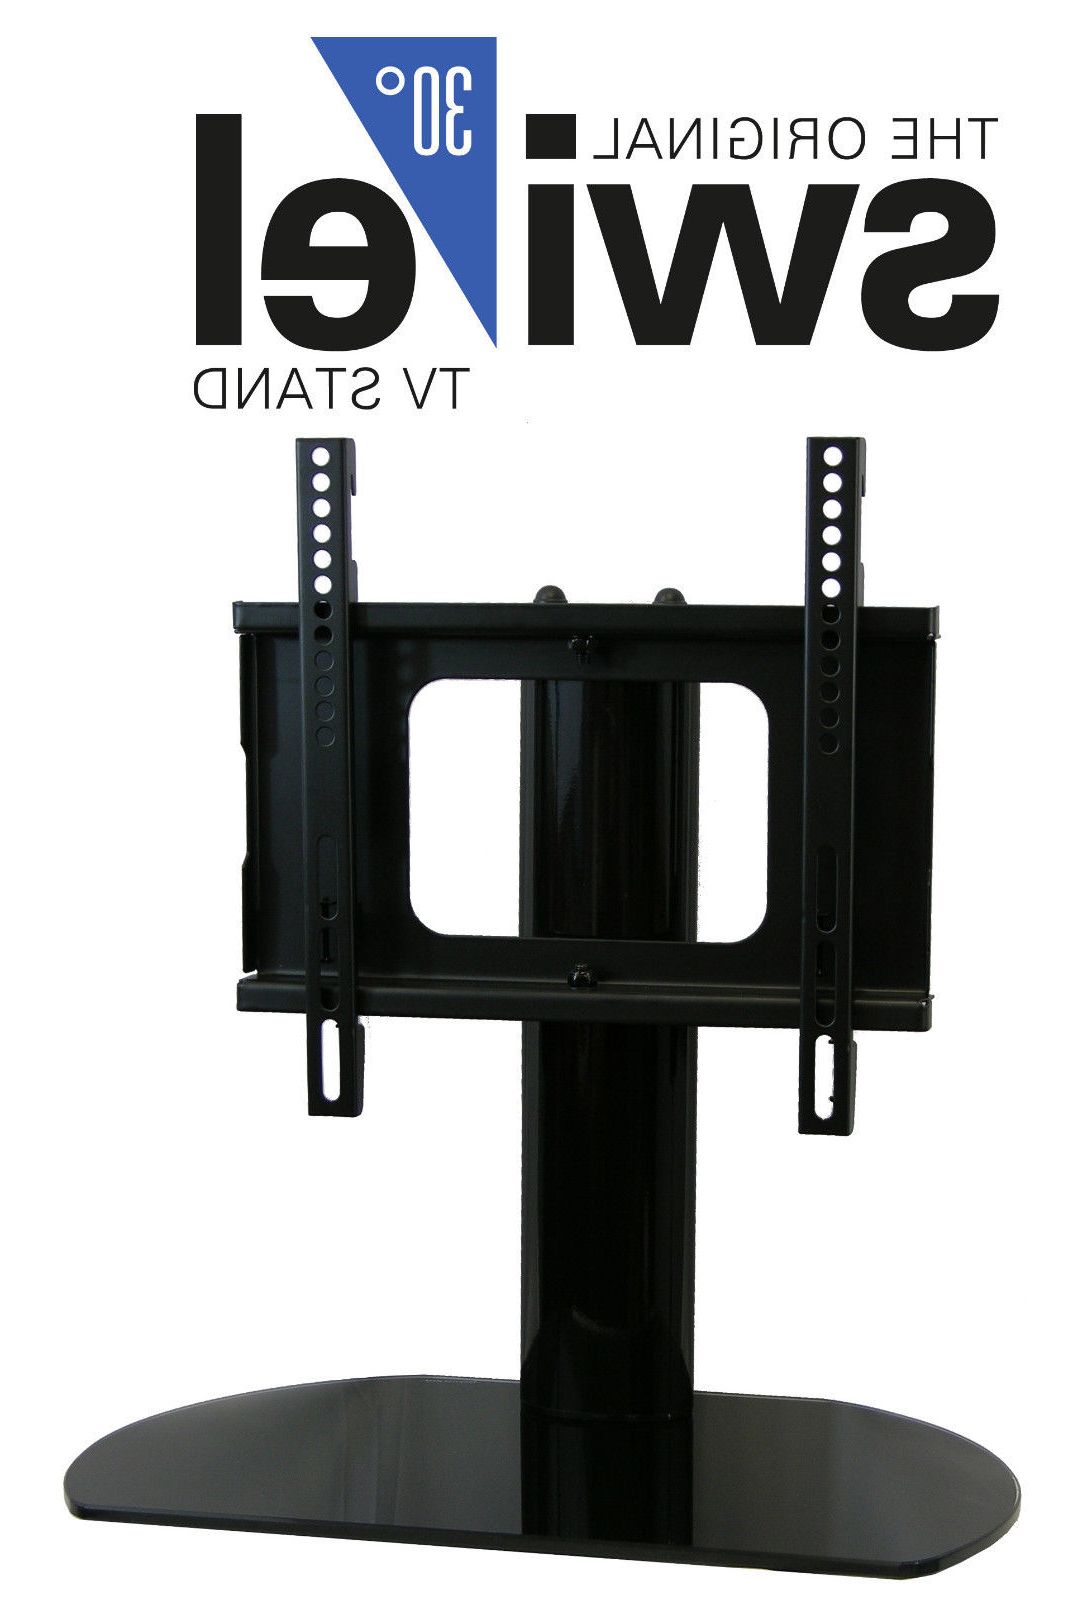 New Universal Replacement Swivel Tv Stand/base For Emerson Lc320em1 Regarding Latest Emerson Tv Stands (View 1 of 20)